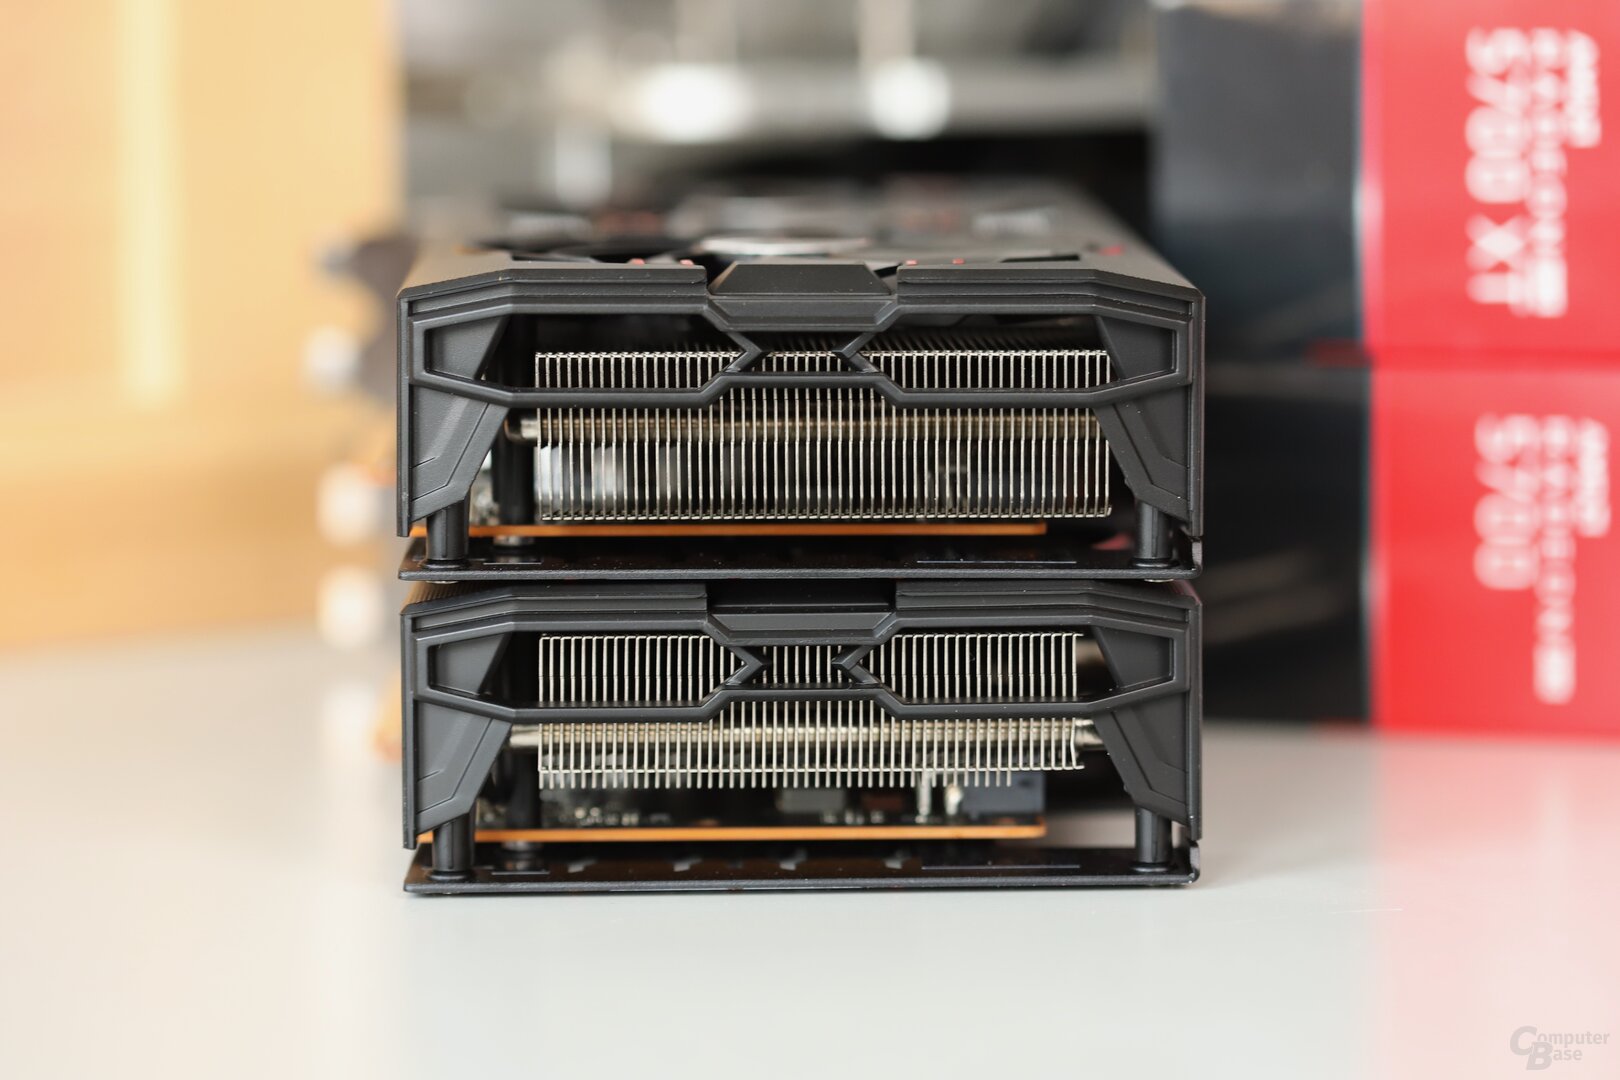 The aluminum radiator of the XT variant (above) is also thicker